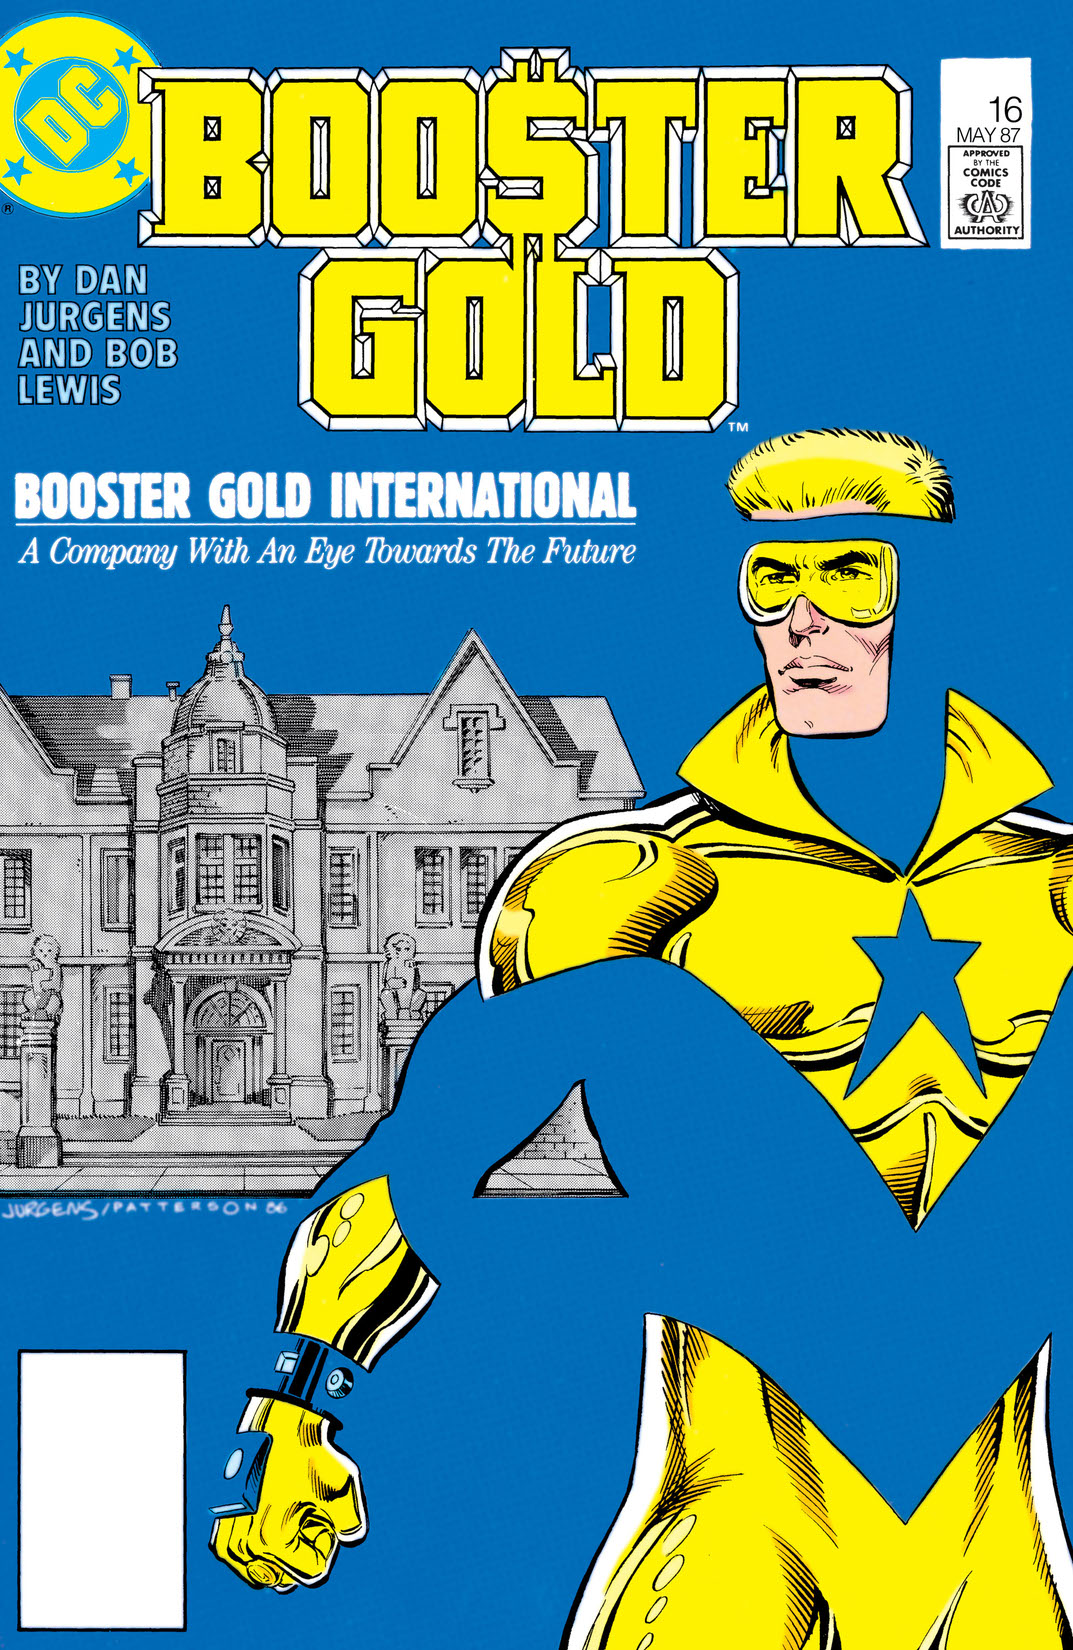 Booster Gold (1985-) #16 preview images